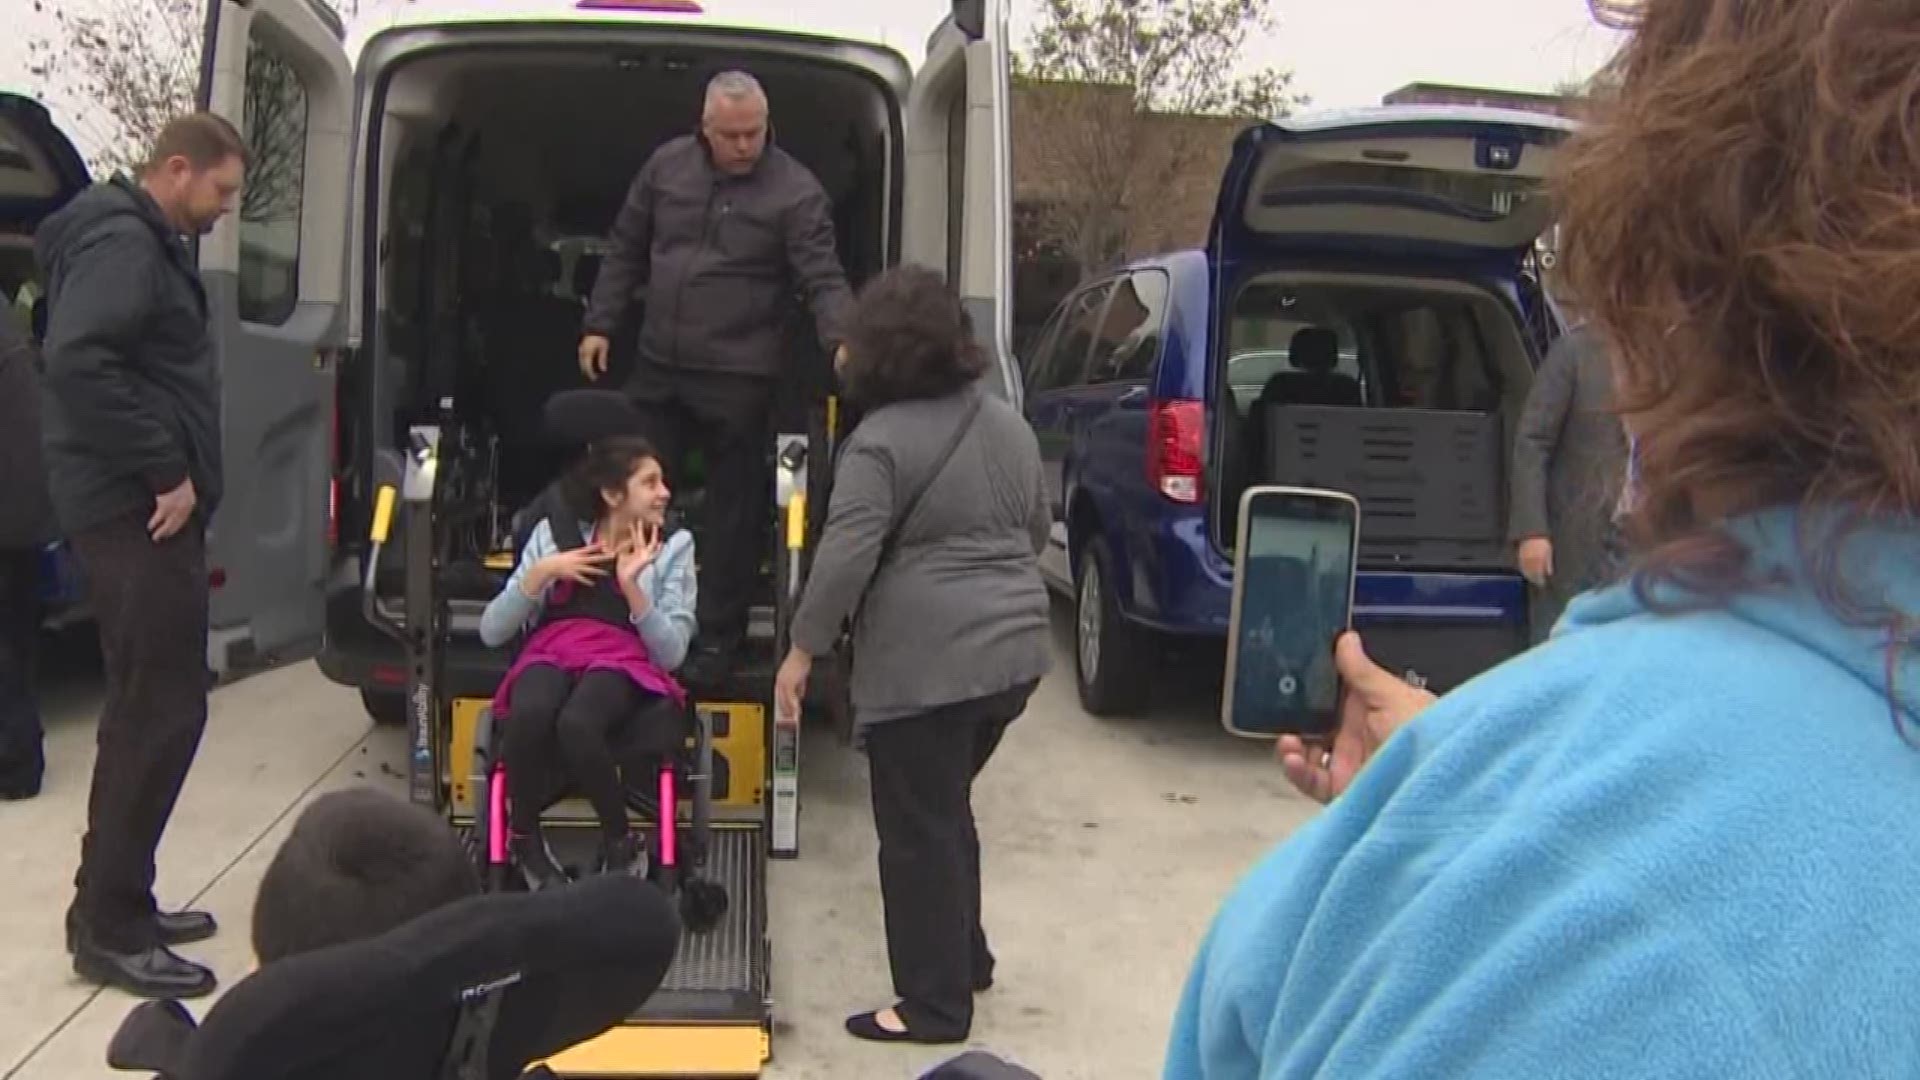 For more than a dozen families in need, Christmas came early in the form of wheelchair-accessible vans.